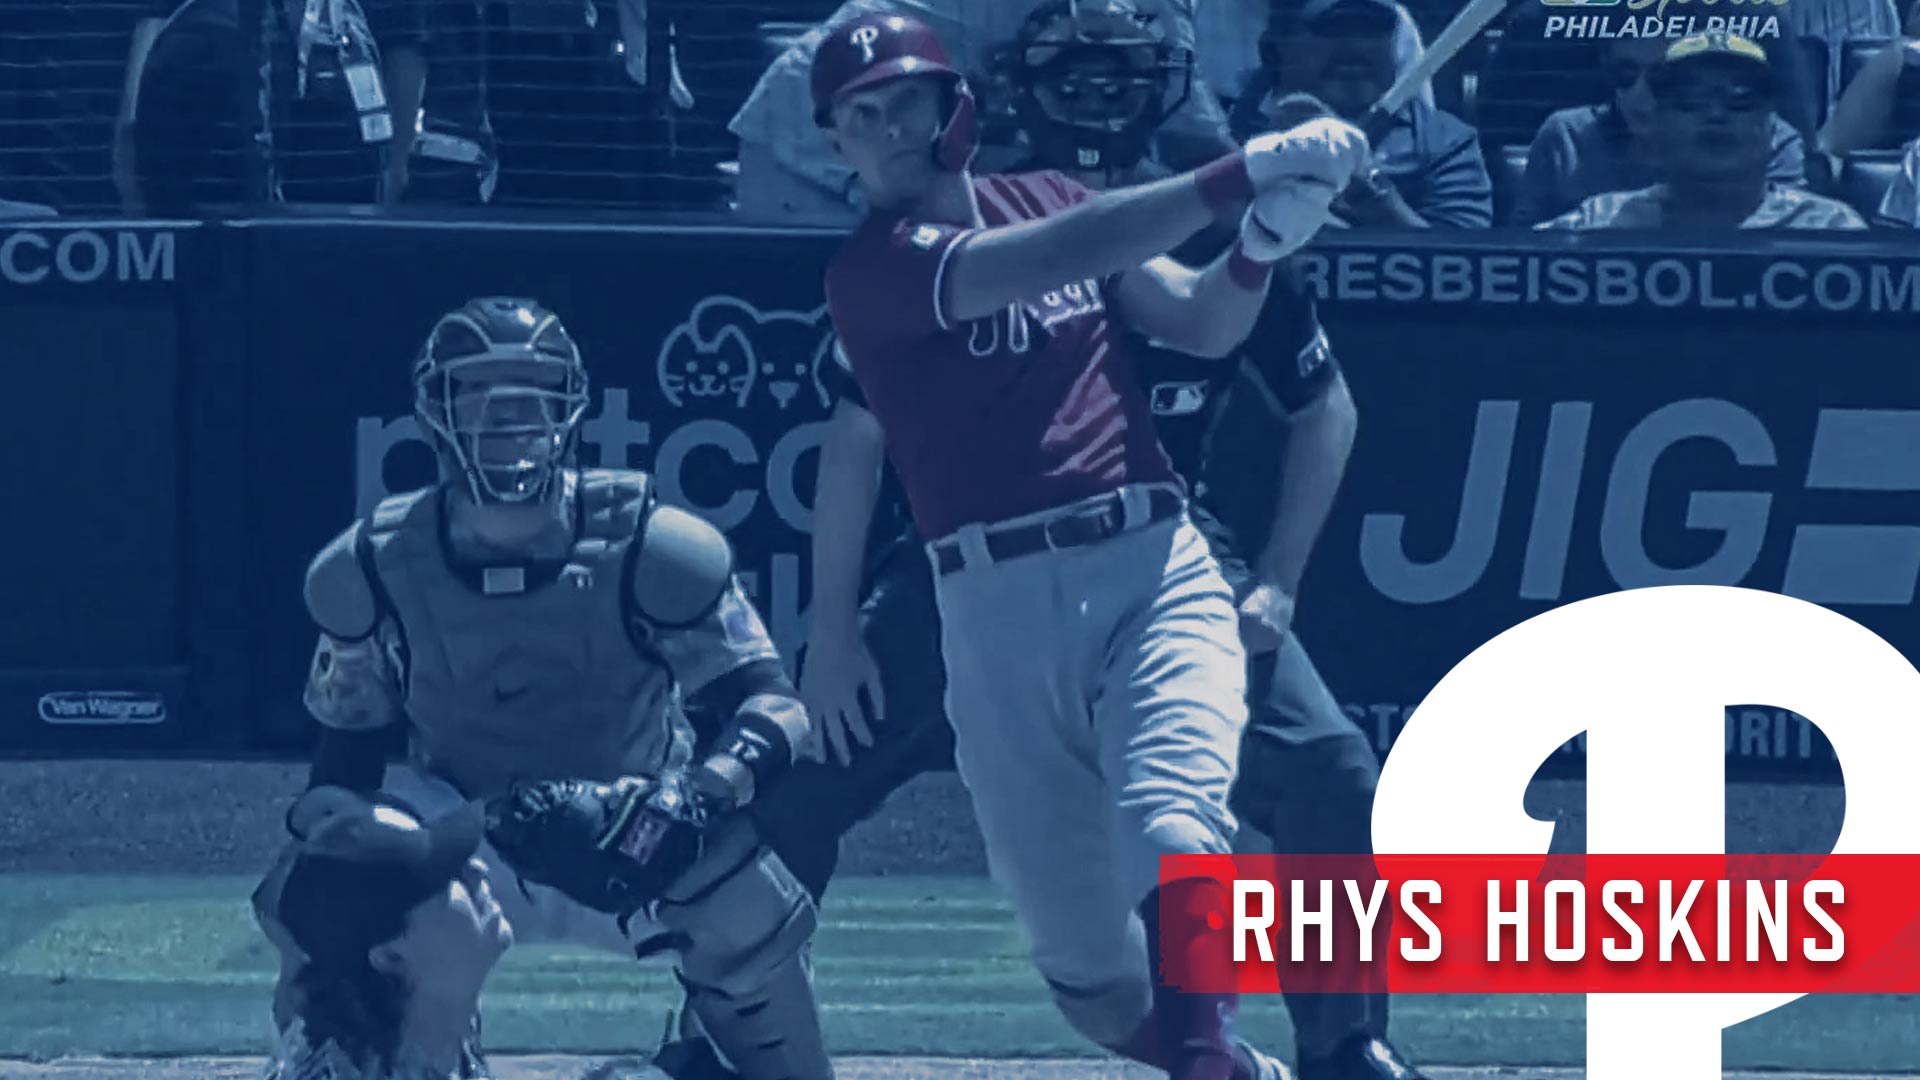 Welcome back, RHYS HOSKINS! A no-doubt home run in his first game